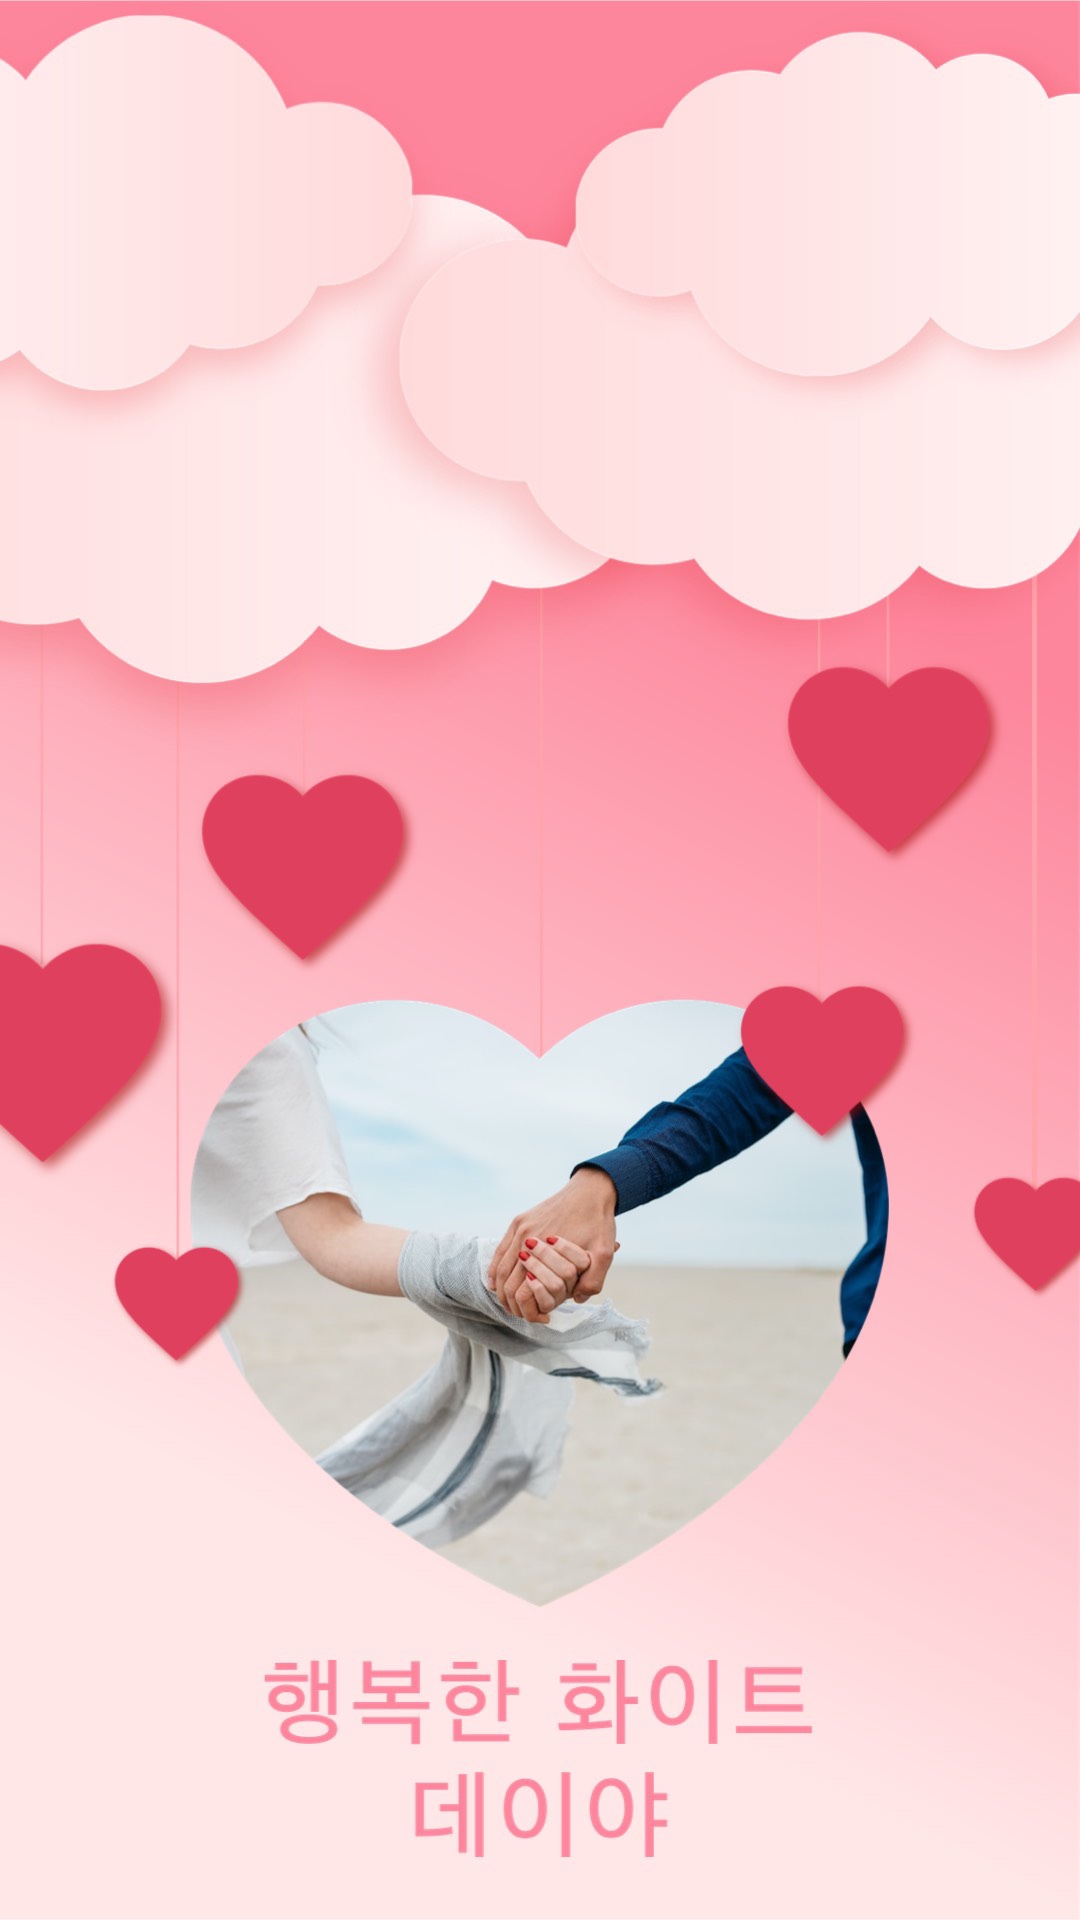 Korea white day romantic pastel hearts clouds instagram story template 